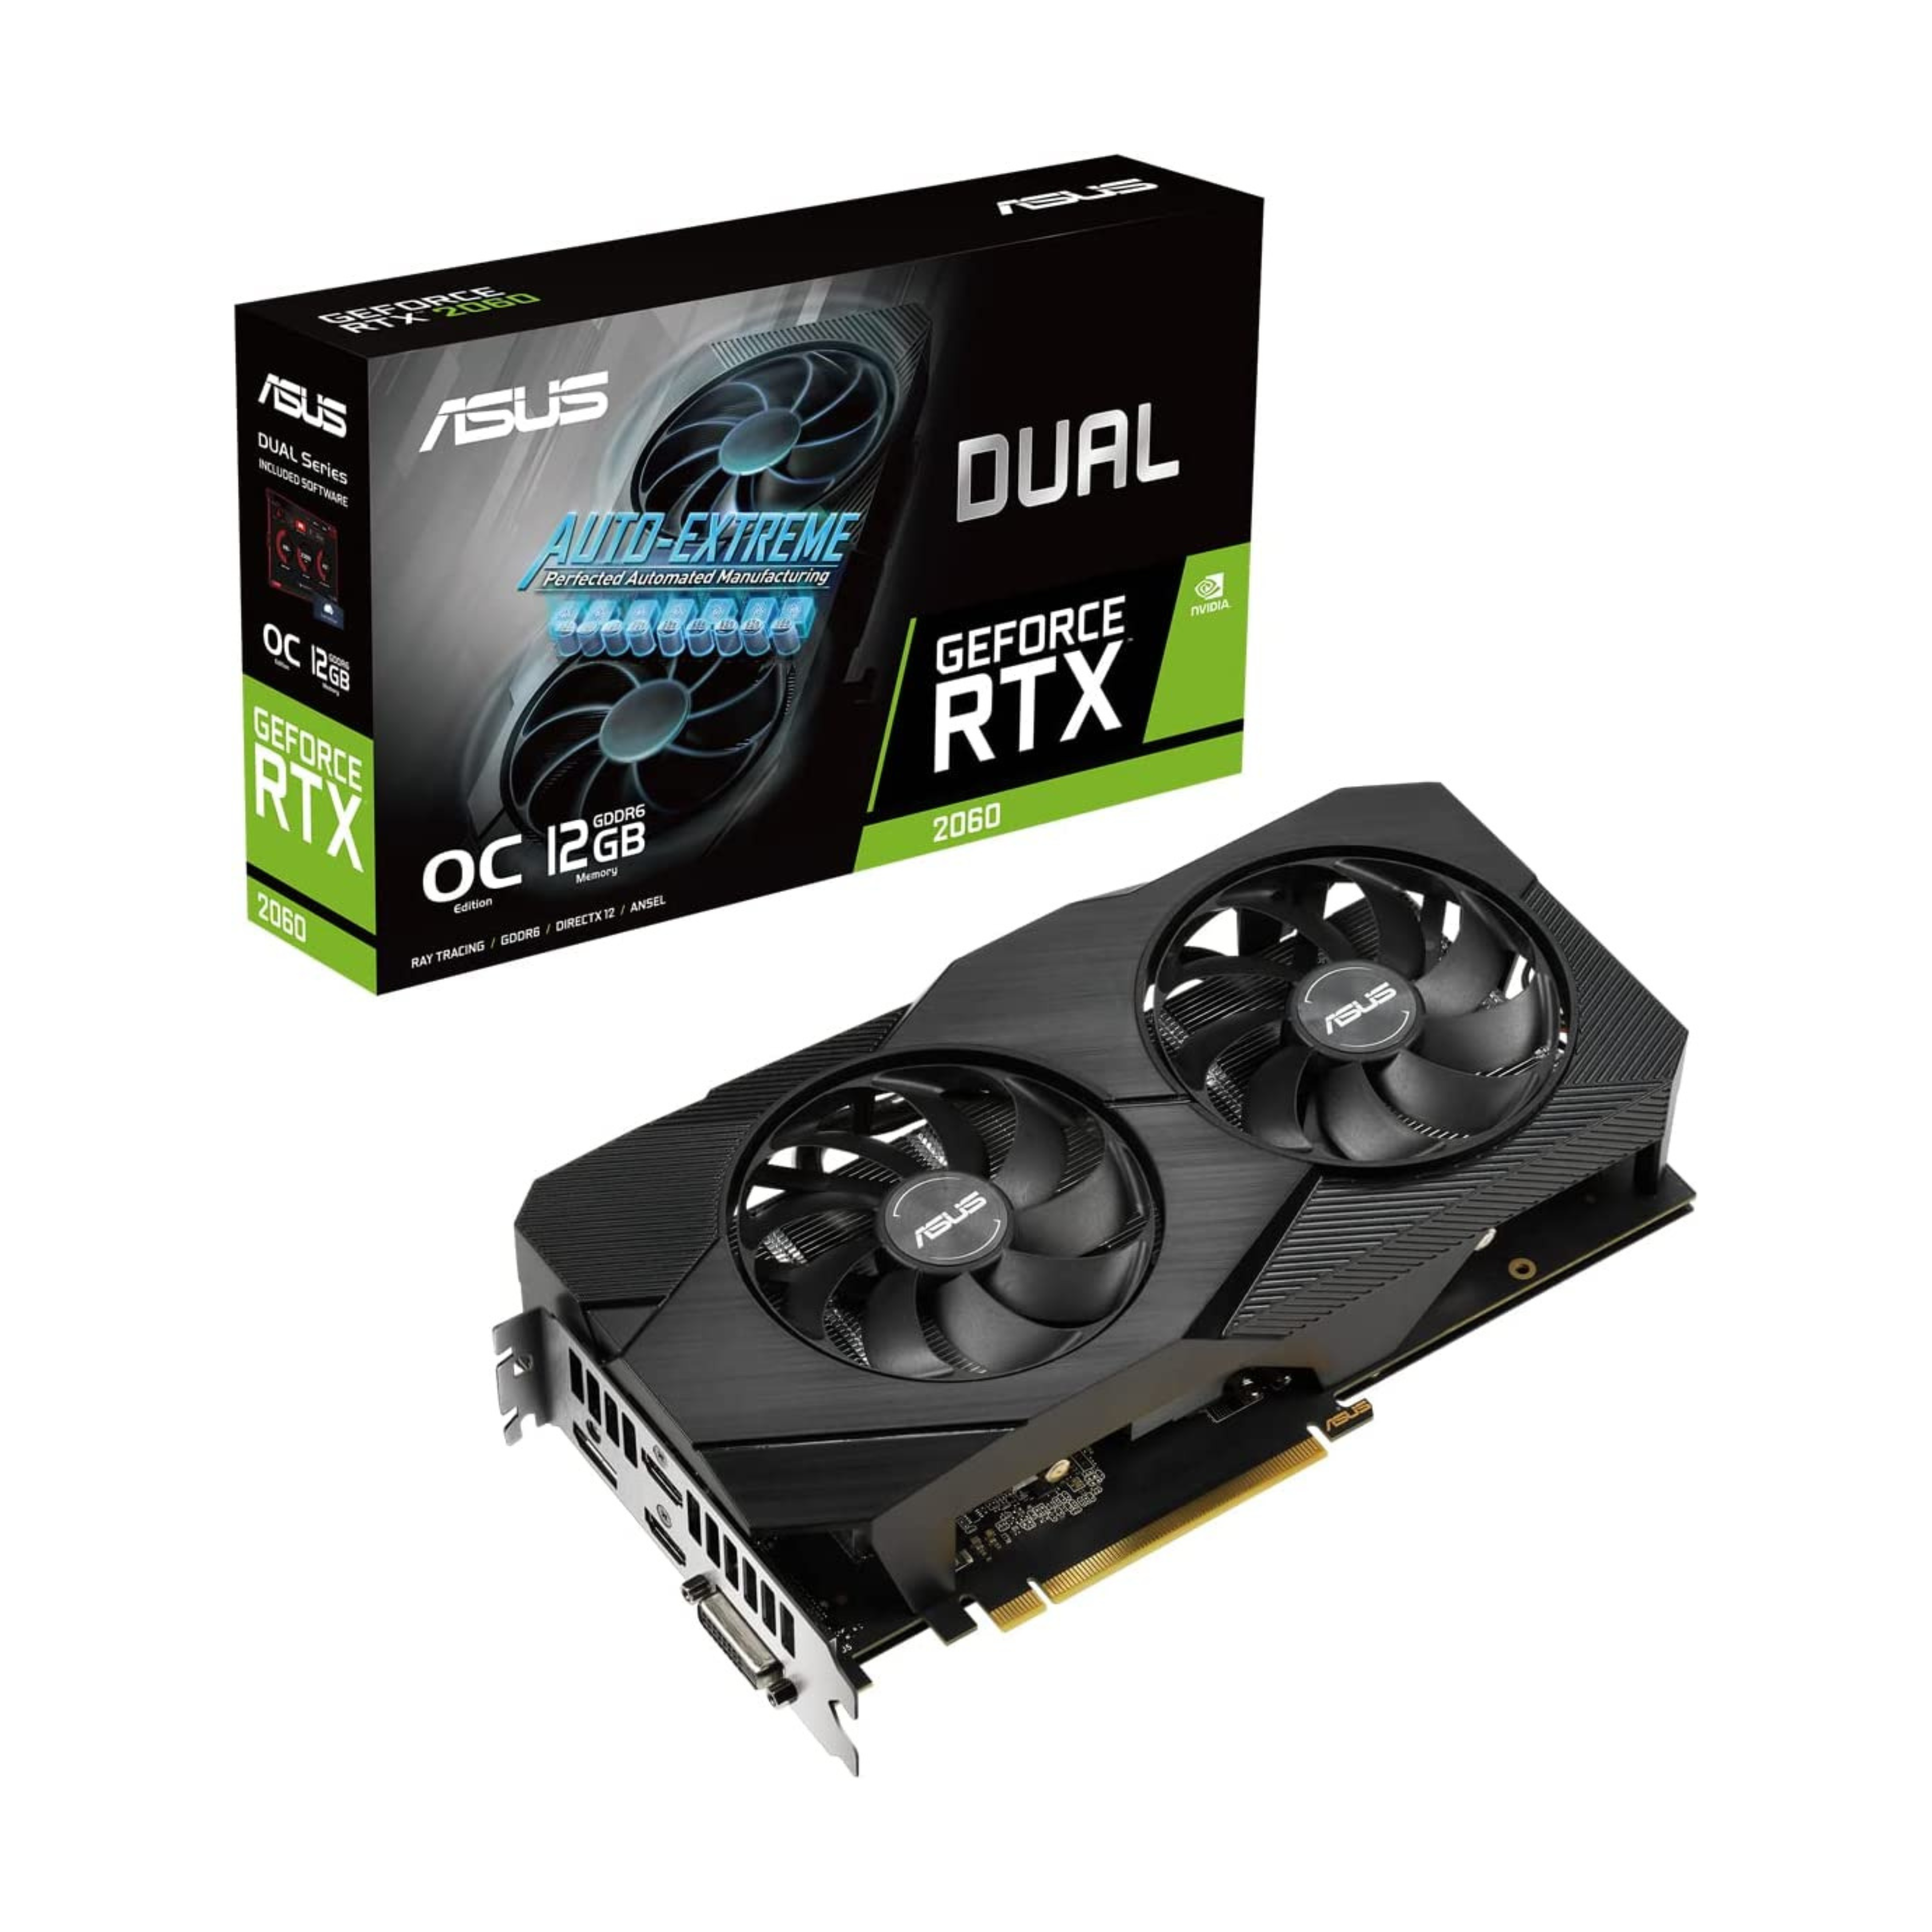 ASUS Dual GeForce RTX 2060 12GB GDDR6 Graphics Card *clearance*